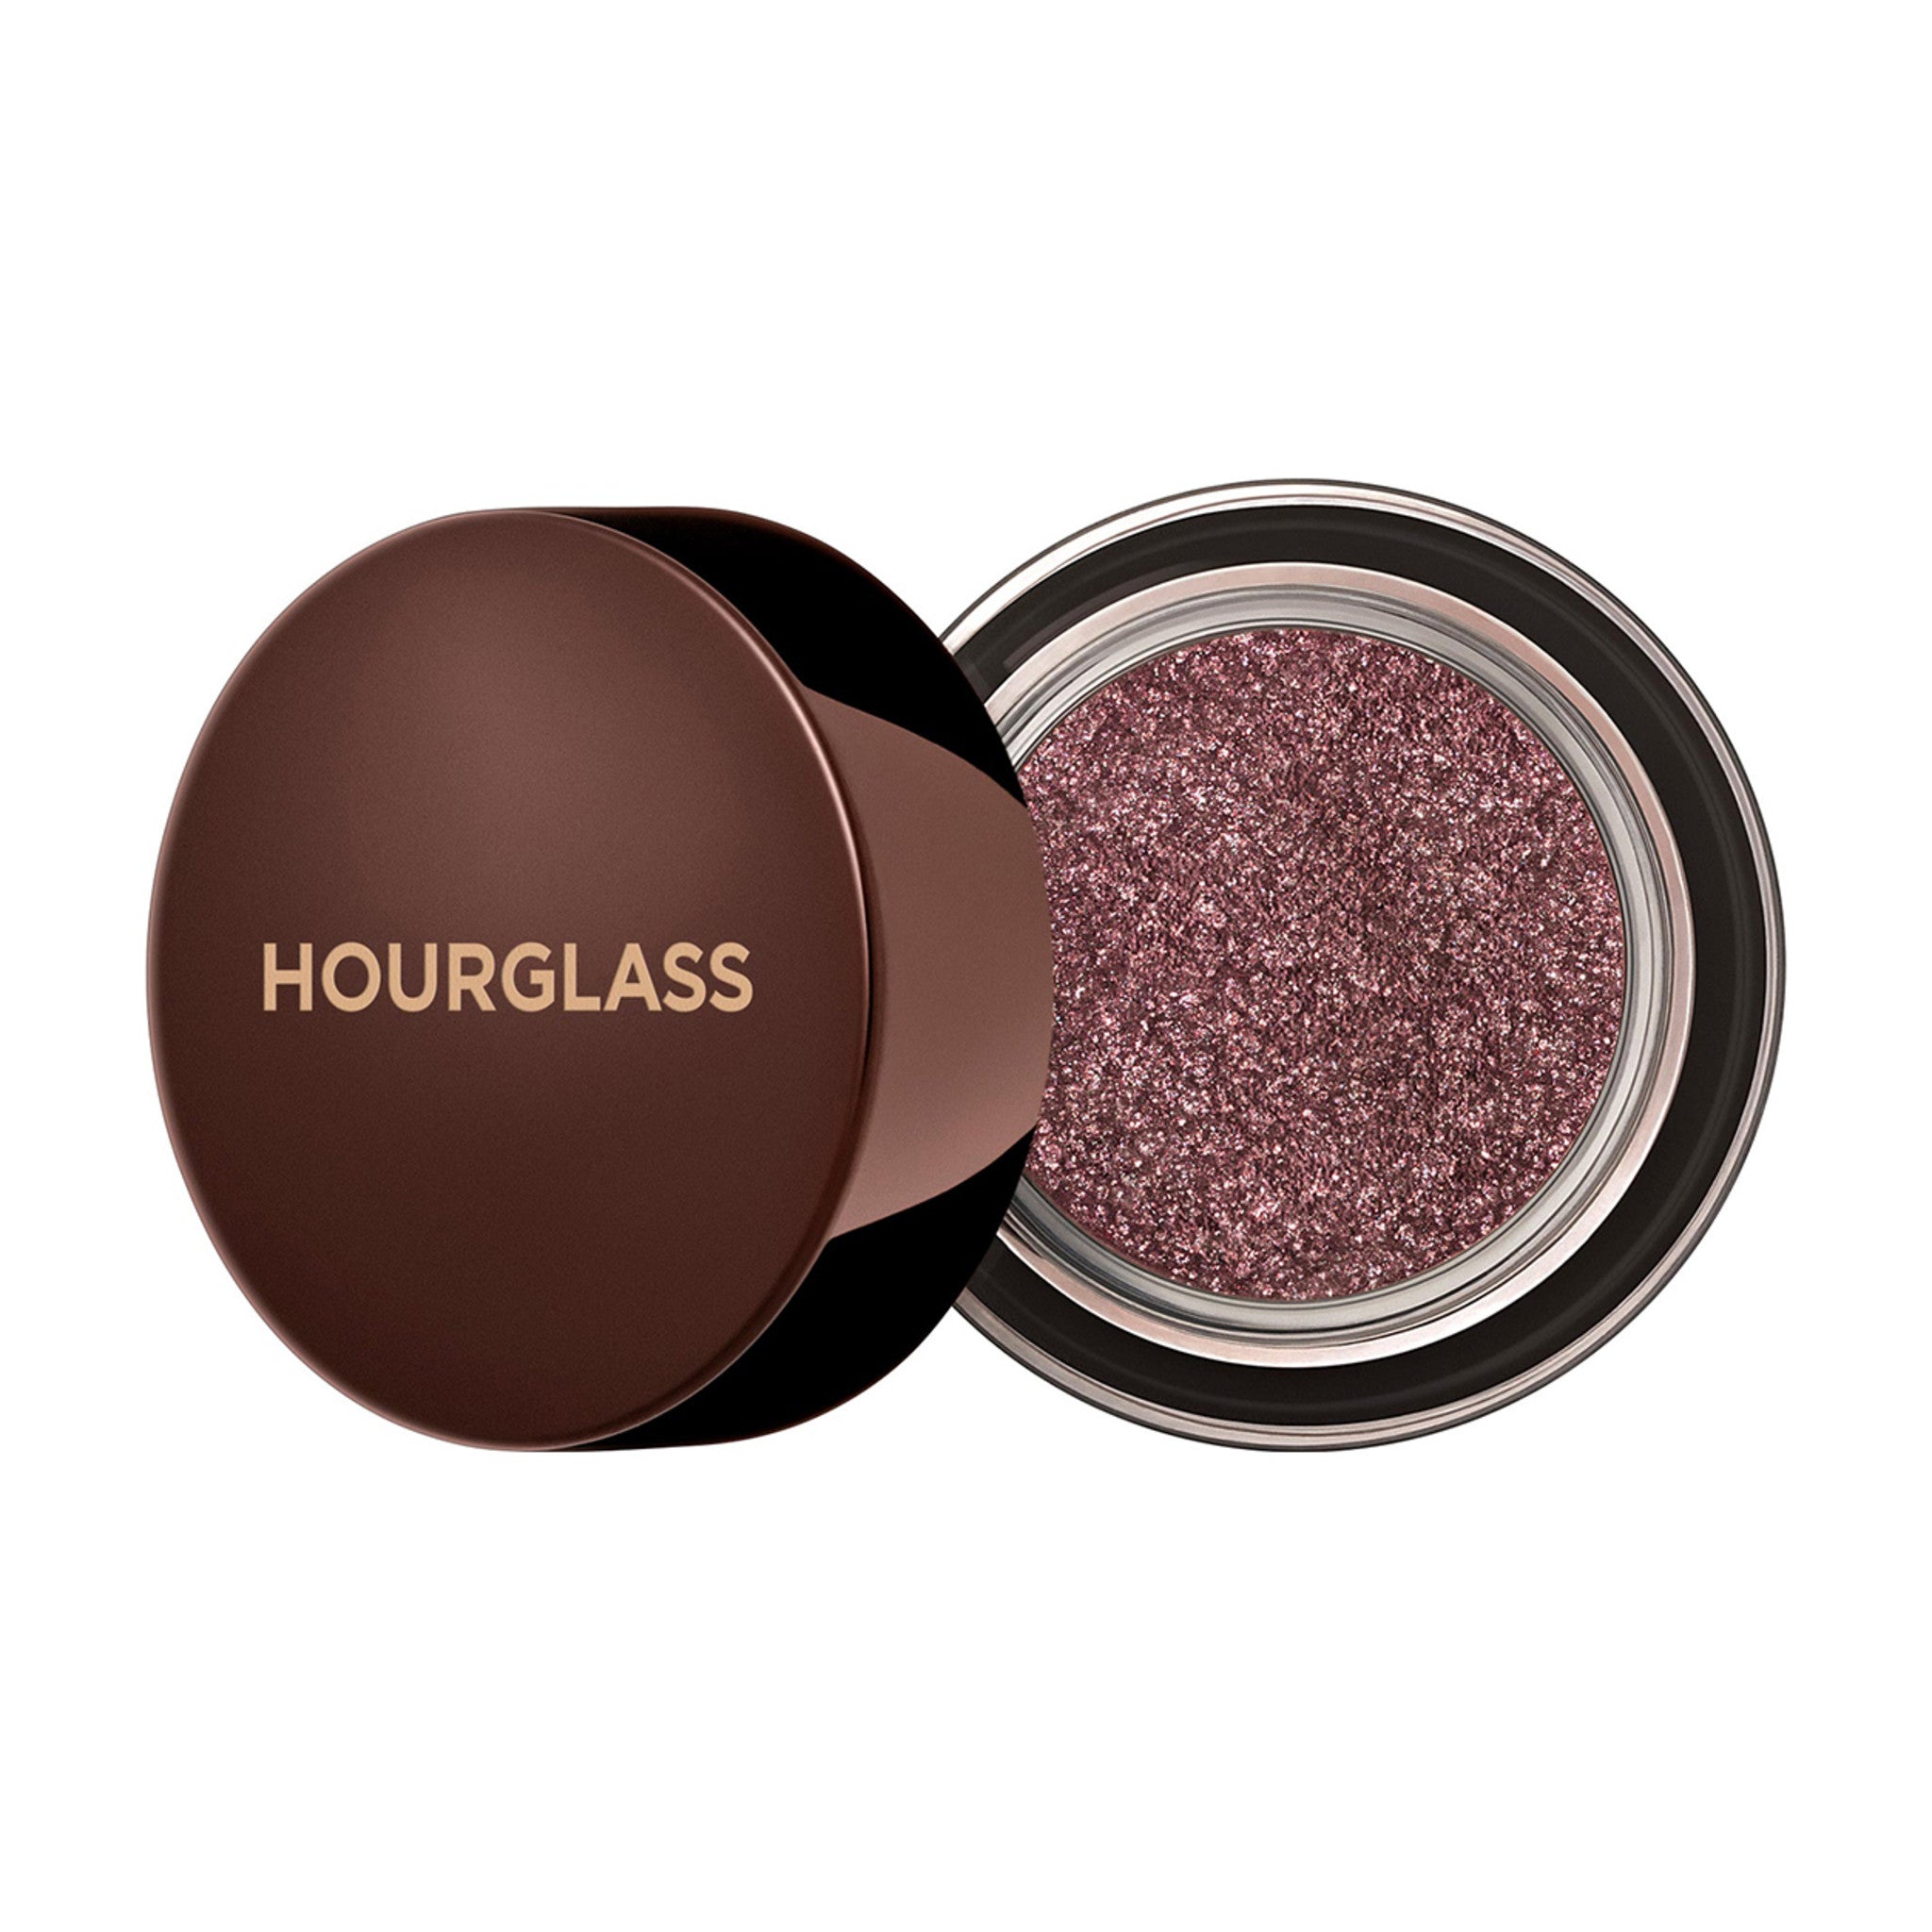 Hourglass Scattered Light Glitter Eyeshadow Color/Shade variant: Aura main image. This product is in the color pink